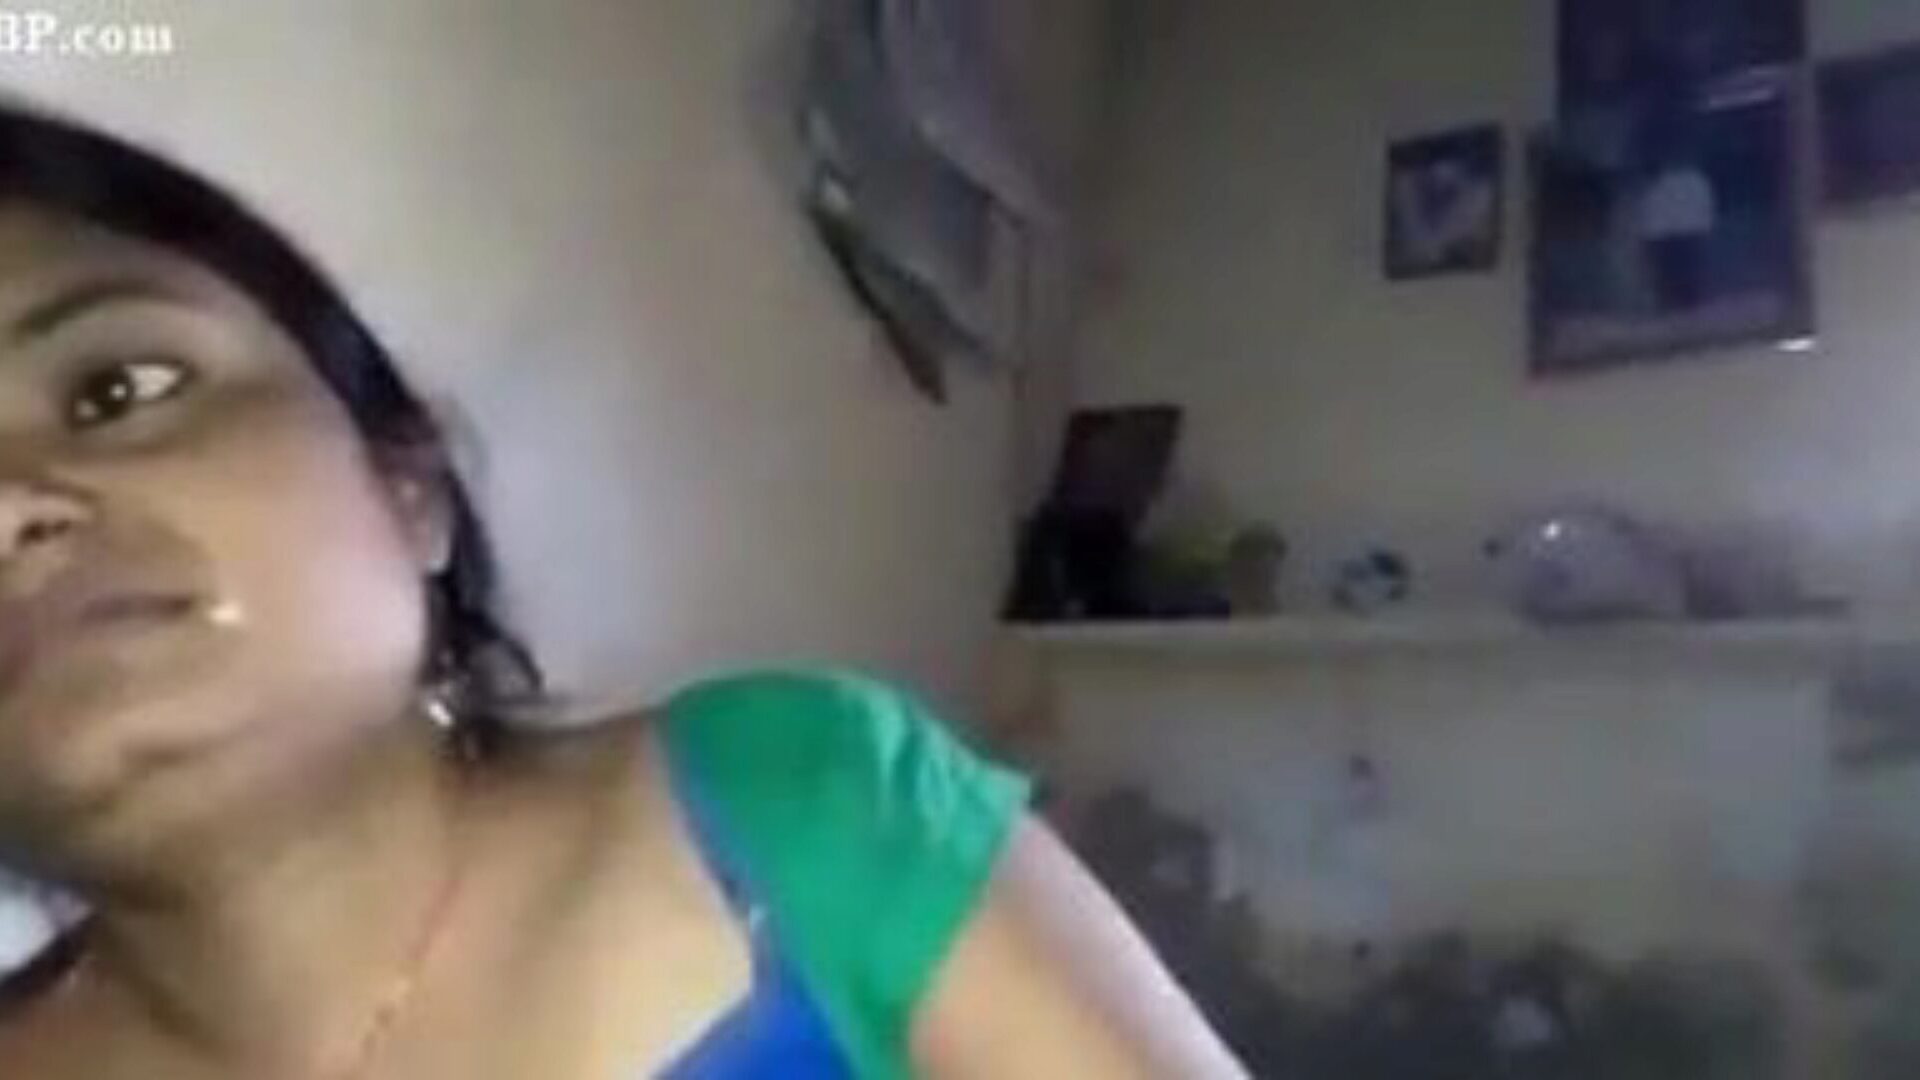 Desi Village Bhabhi with Husband Gives Blowjob and... Watch Desi Village Bhabhi with Husband Gives Blowjob and Handjob episode on xHamster - the ultimate bevy of free-for-all Indian Village Tube porno tube movies